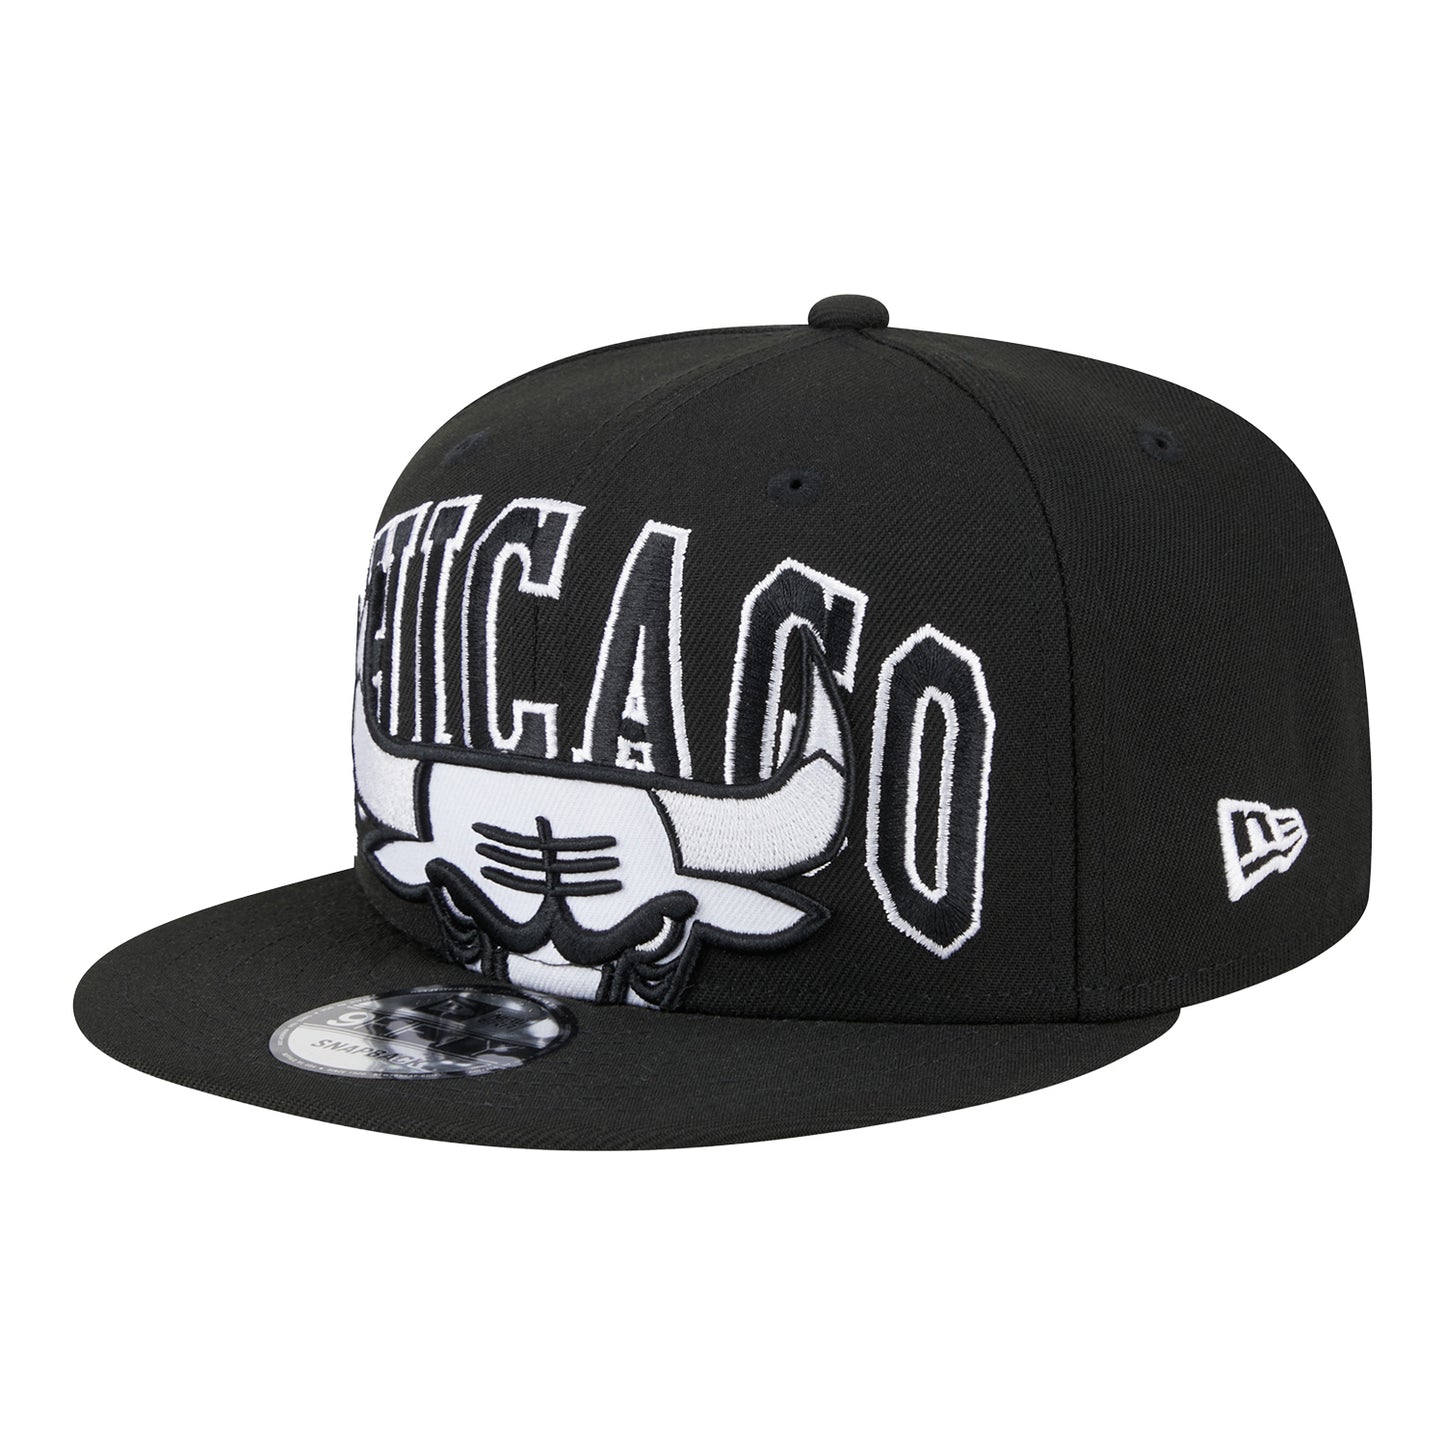 Chicago Bulls 23 Tip Off Snapback Hat - black and white - front view